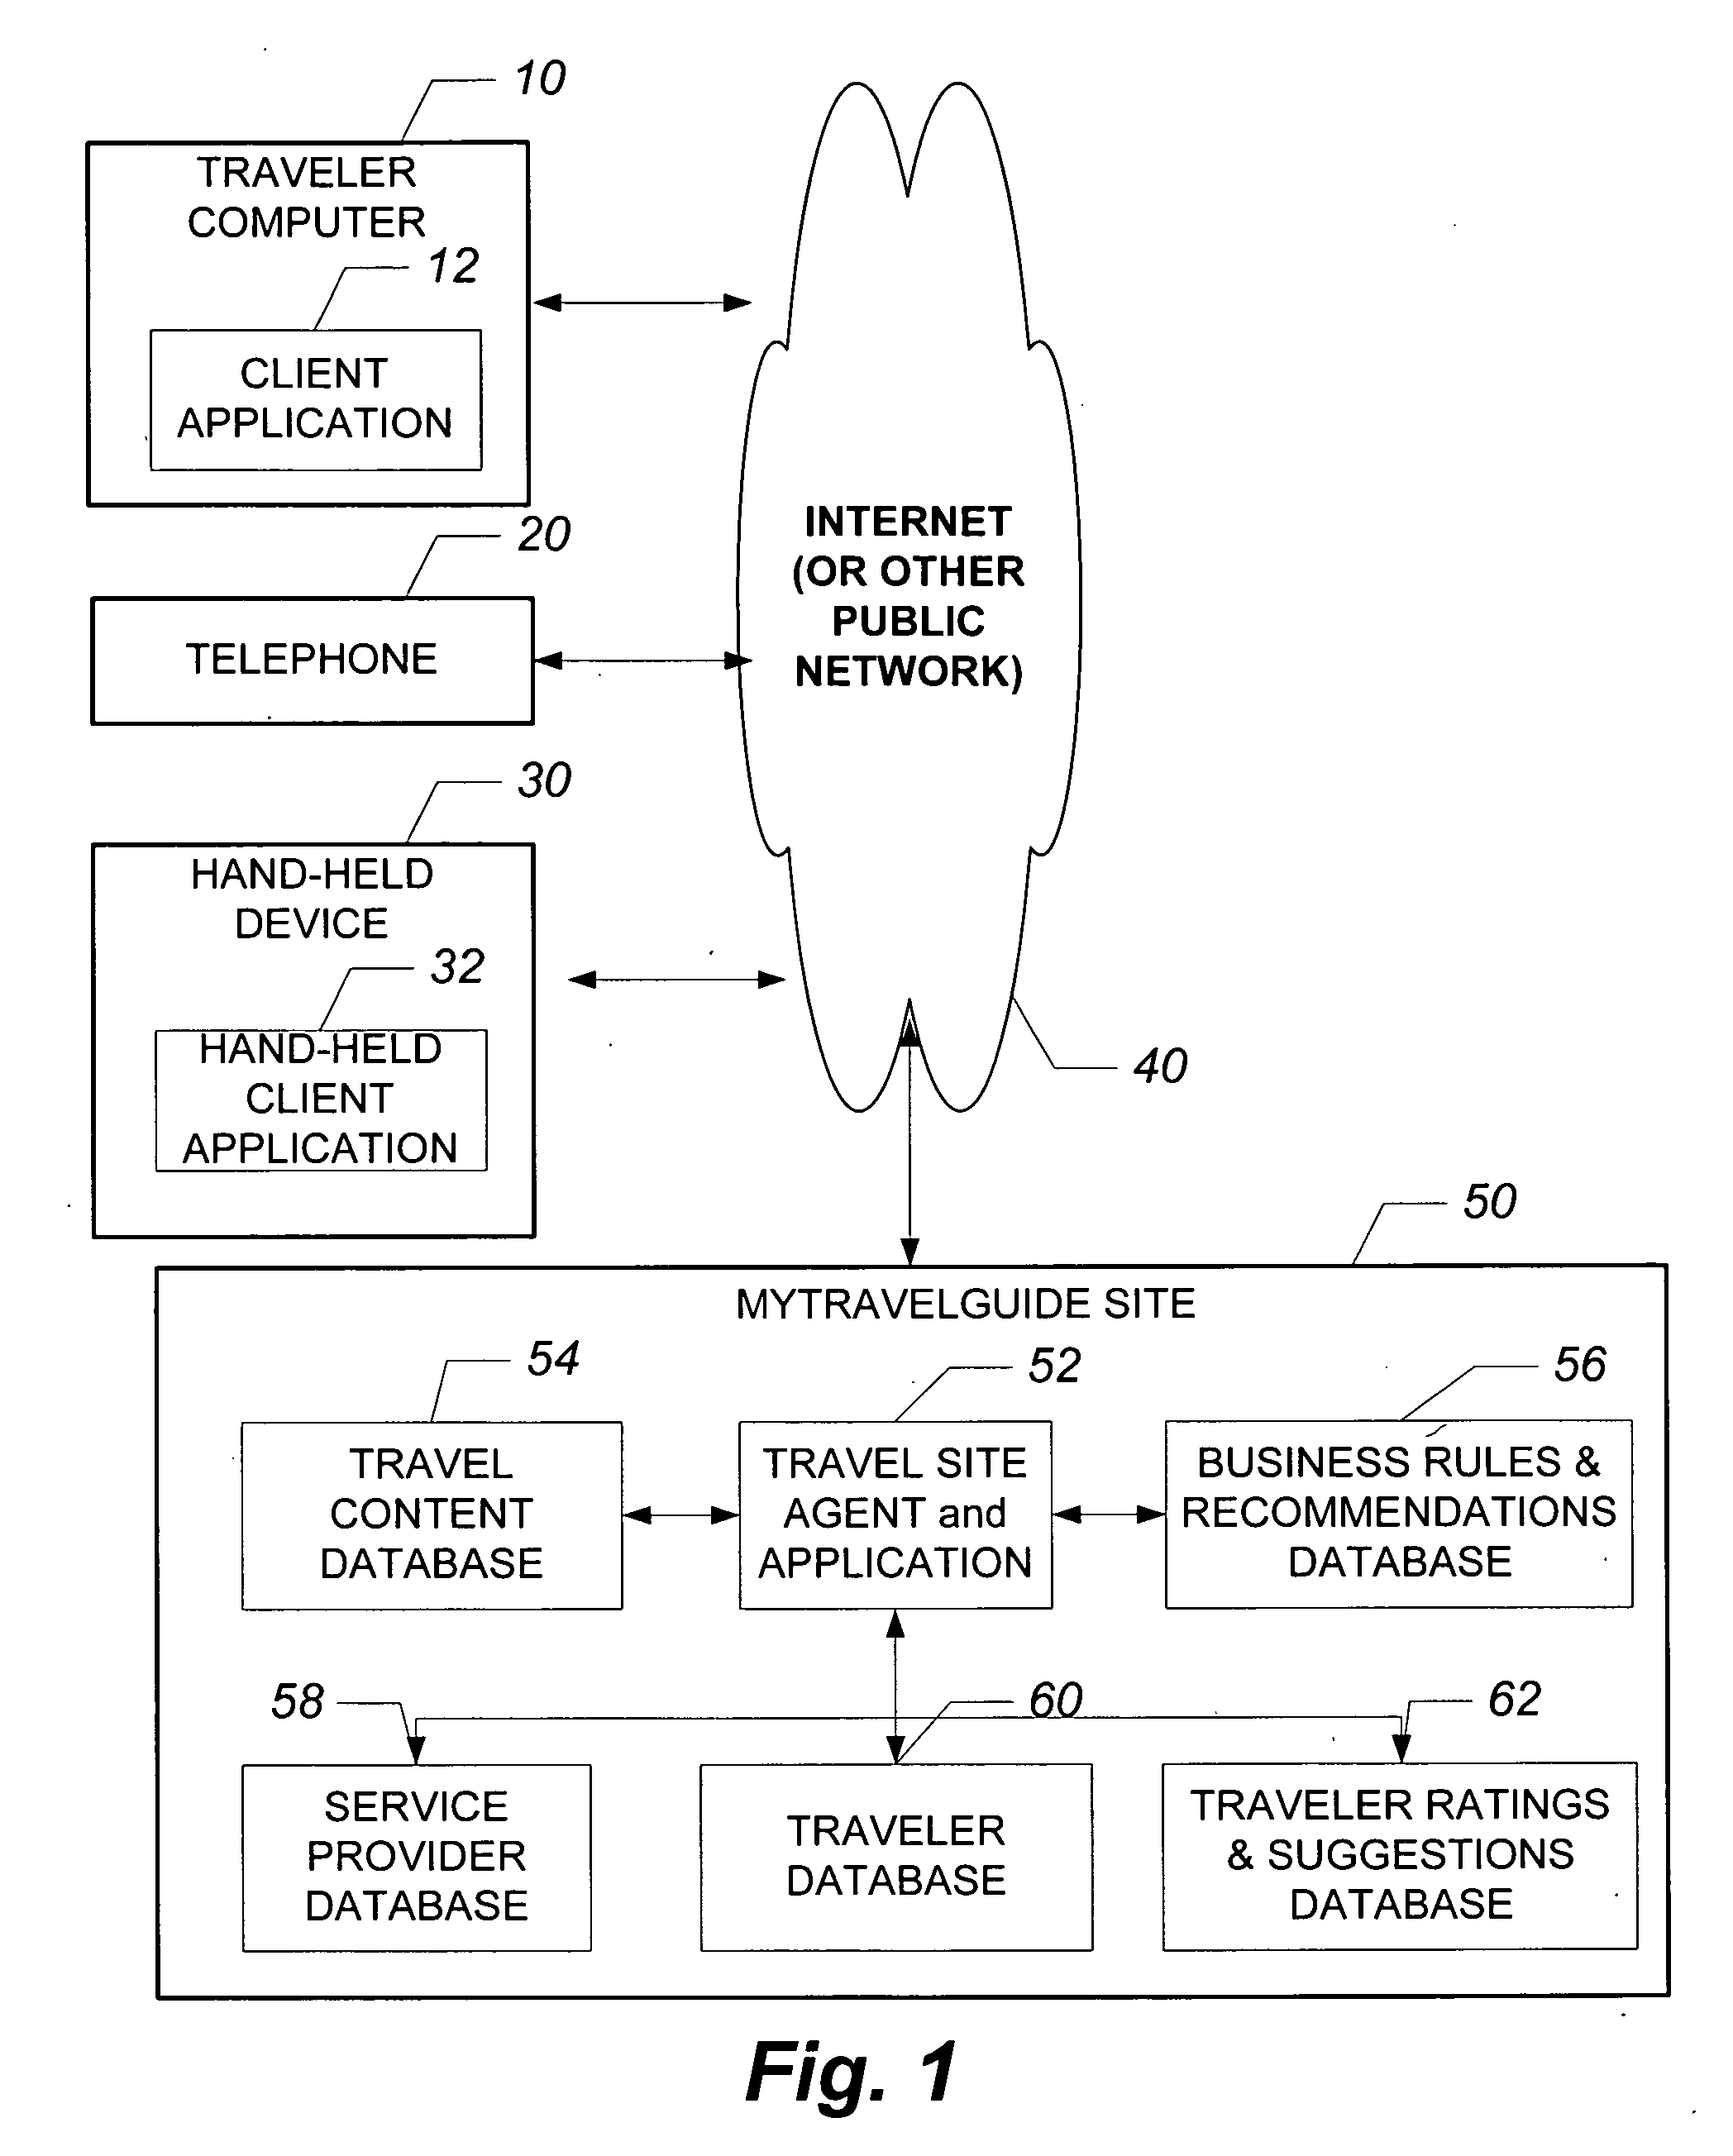 System and method for providing customized travel guides and itineraries over a distributed network